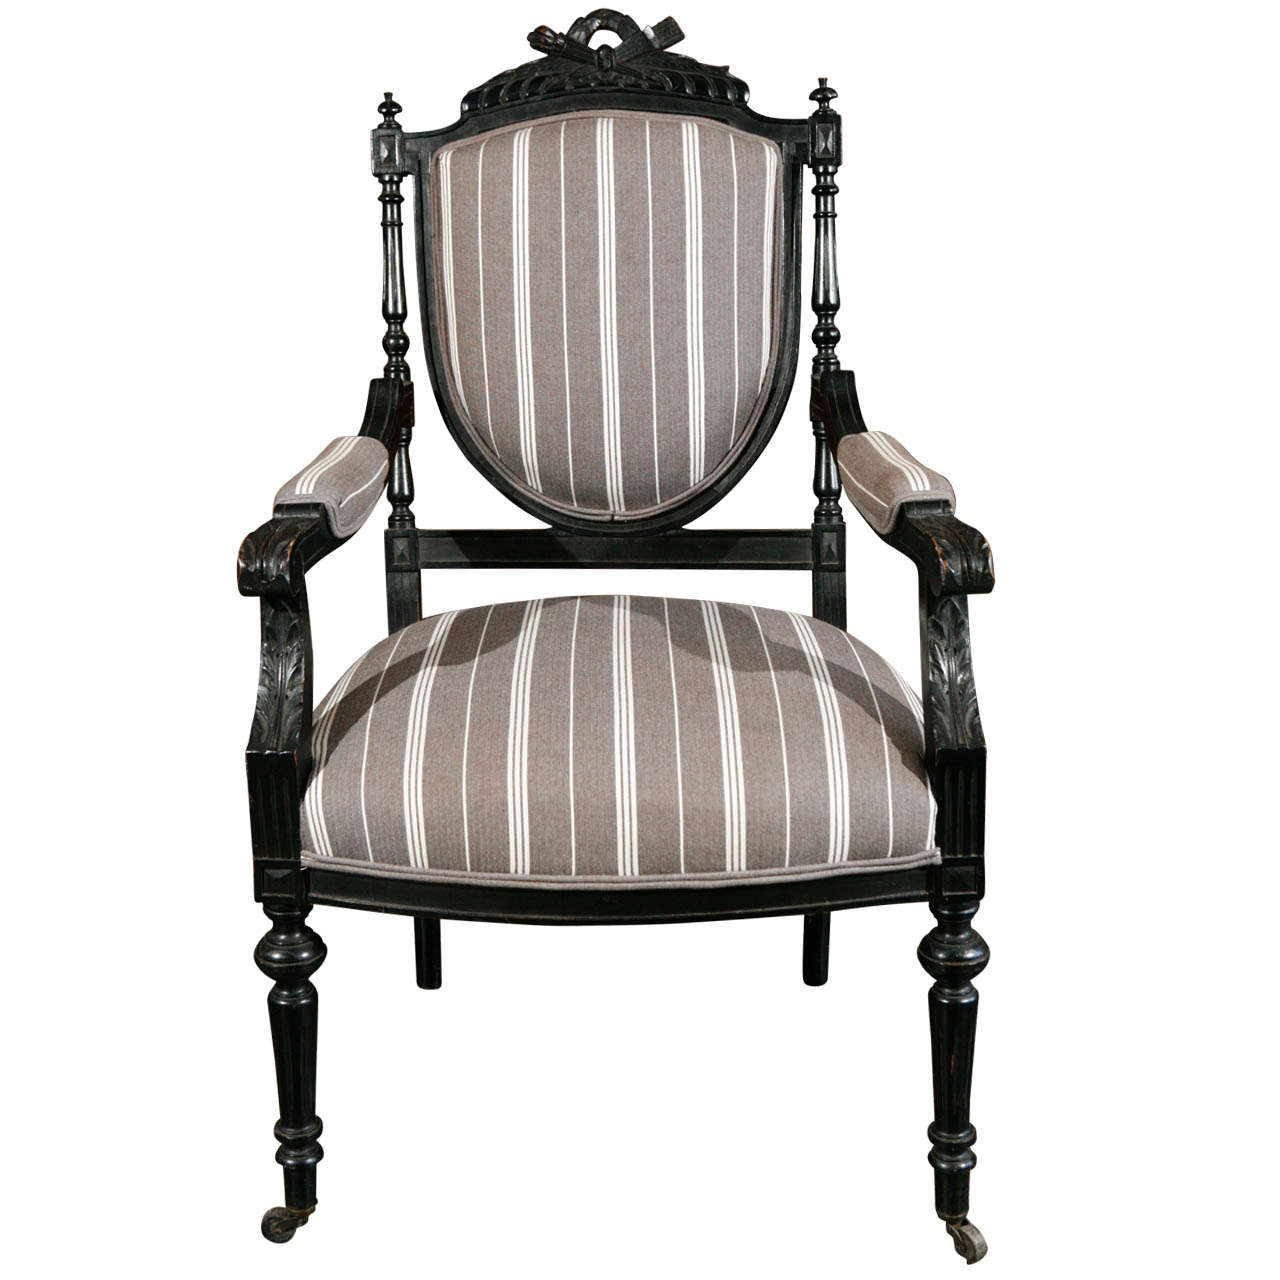 1870s Louis XVI Style Ebonized Fauteuil in Upholstered Linen